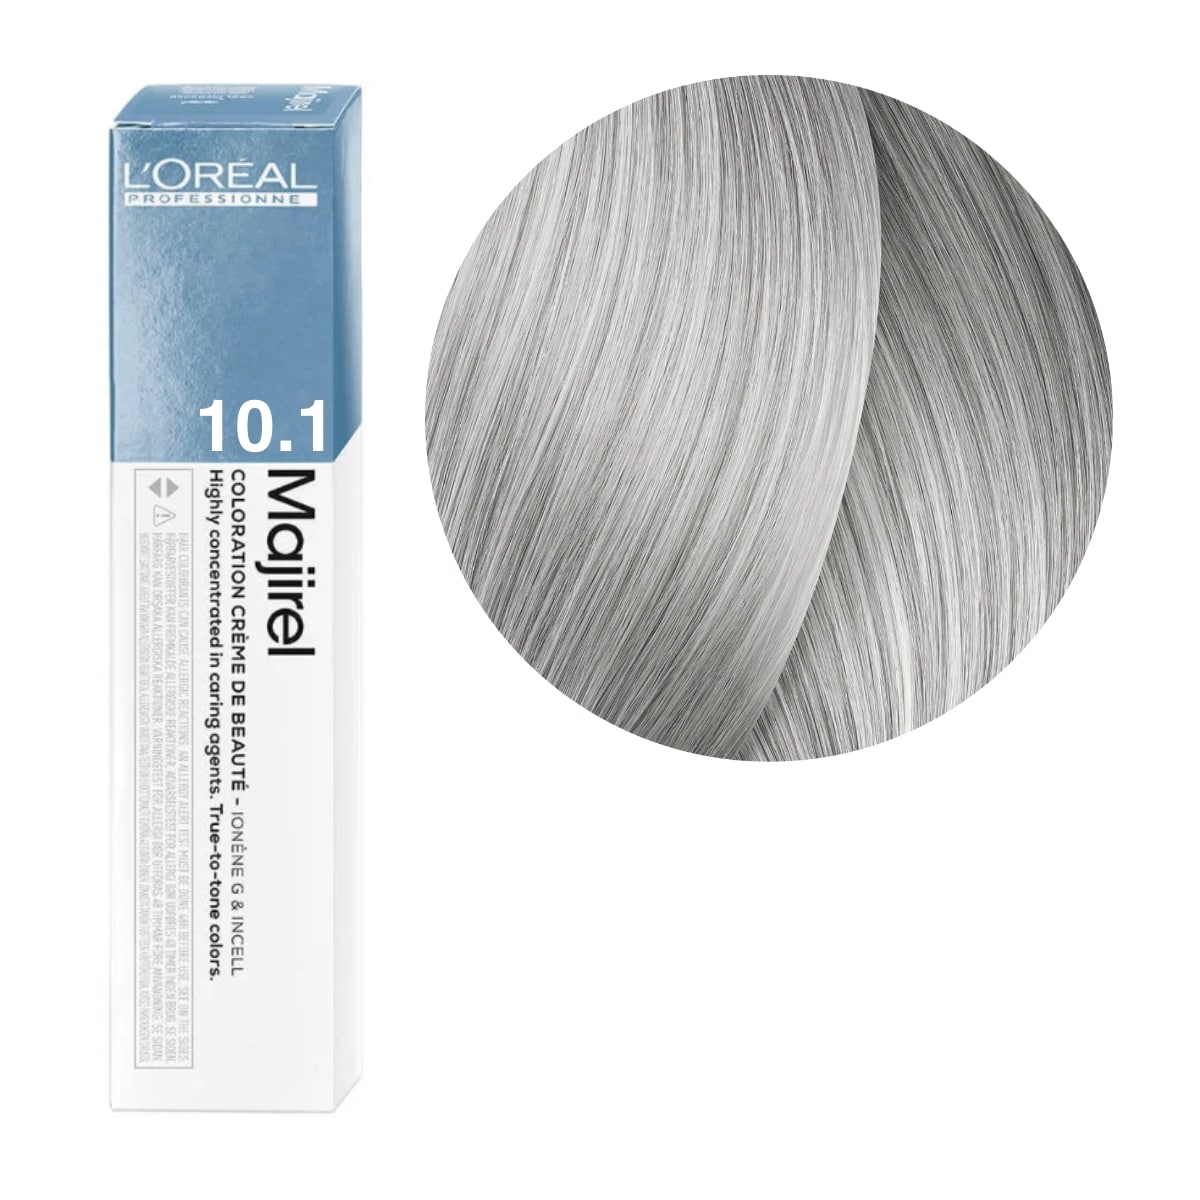 a box of lorel hair colour 10.1on a white background